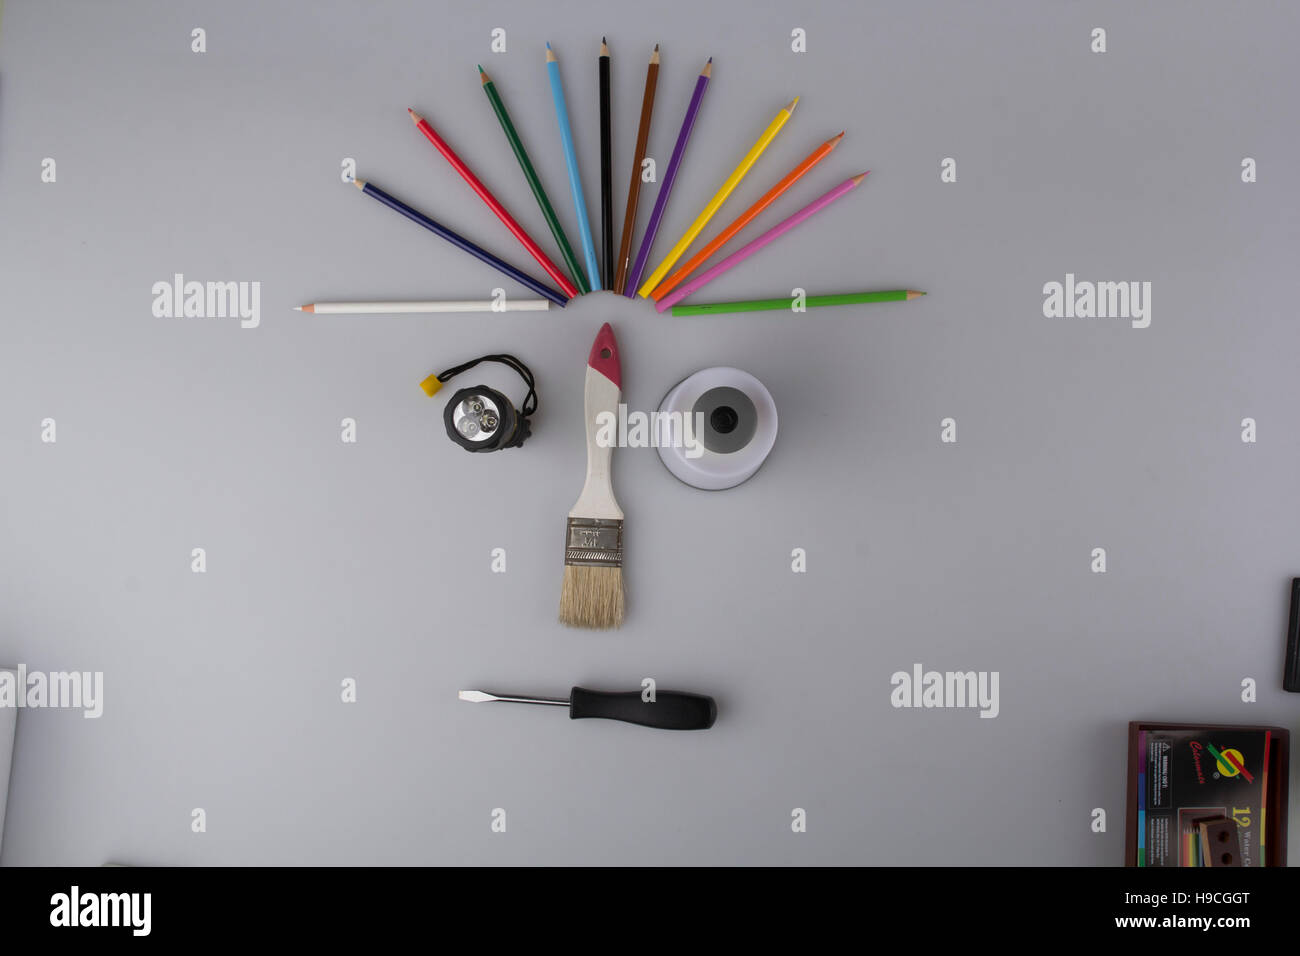 https://c8.alamy.com/comp/H9CGGT/desk-of-an-artist-with-lots-stationery-objects-studio-shot-on-white-H9CGGT.jpg